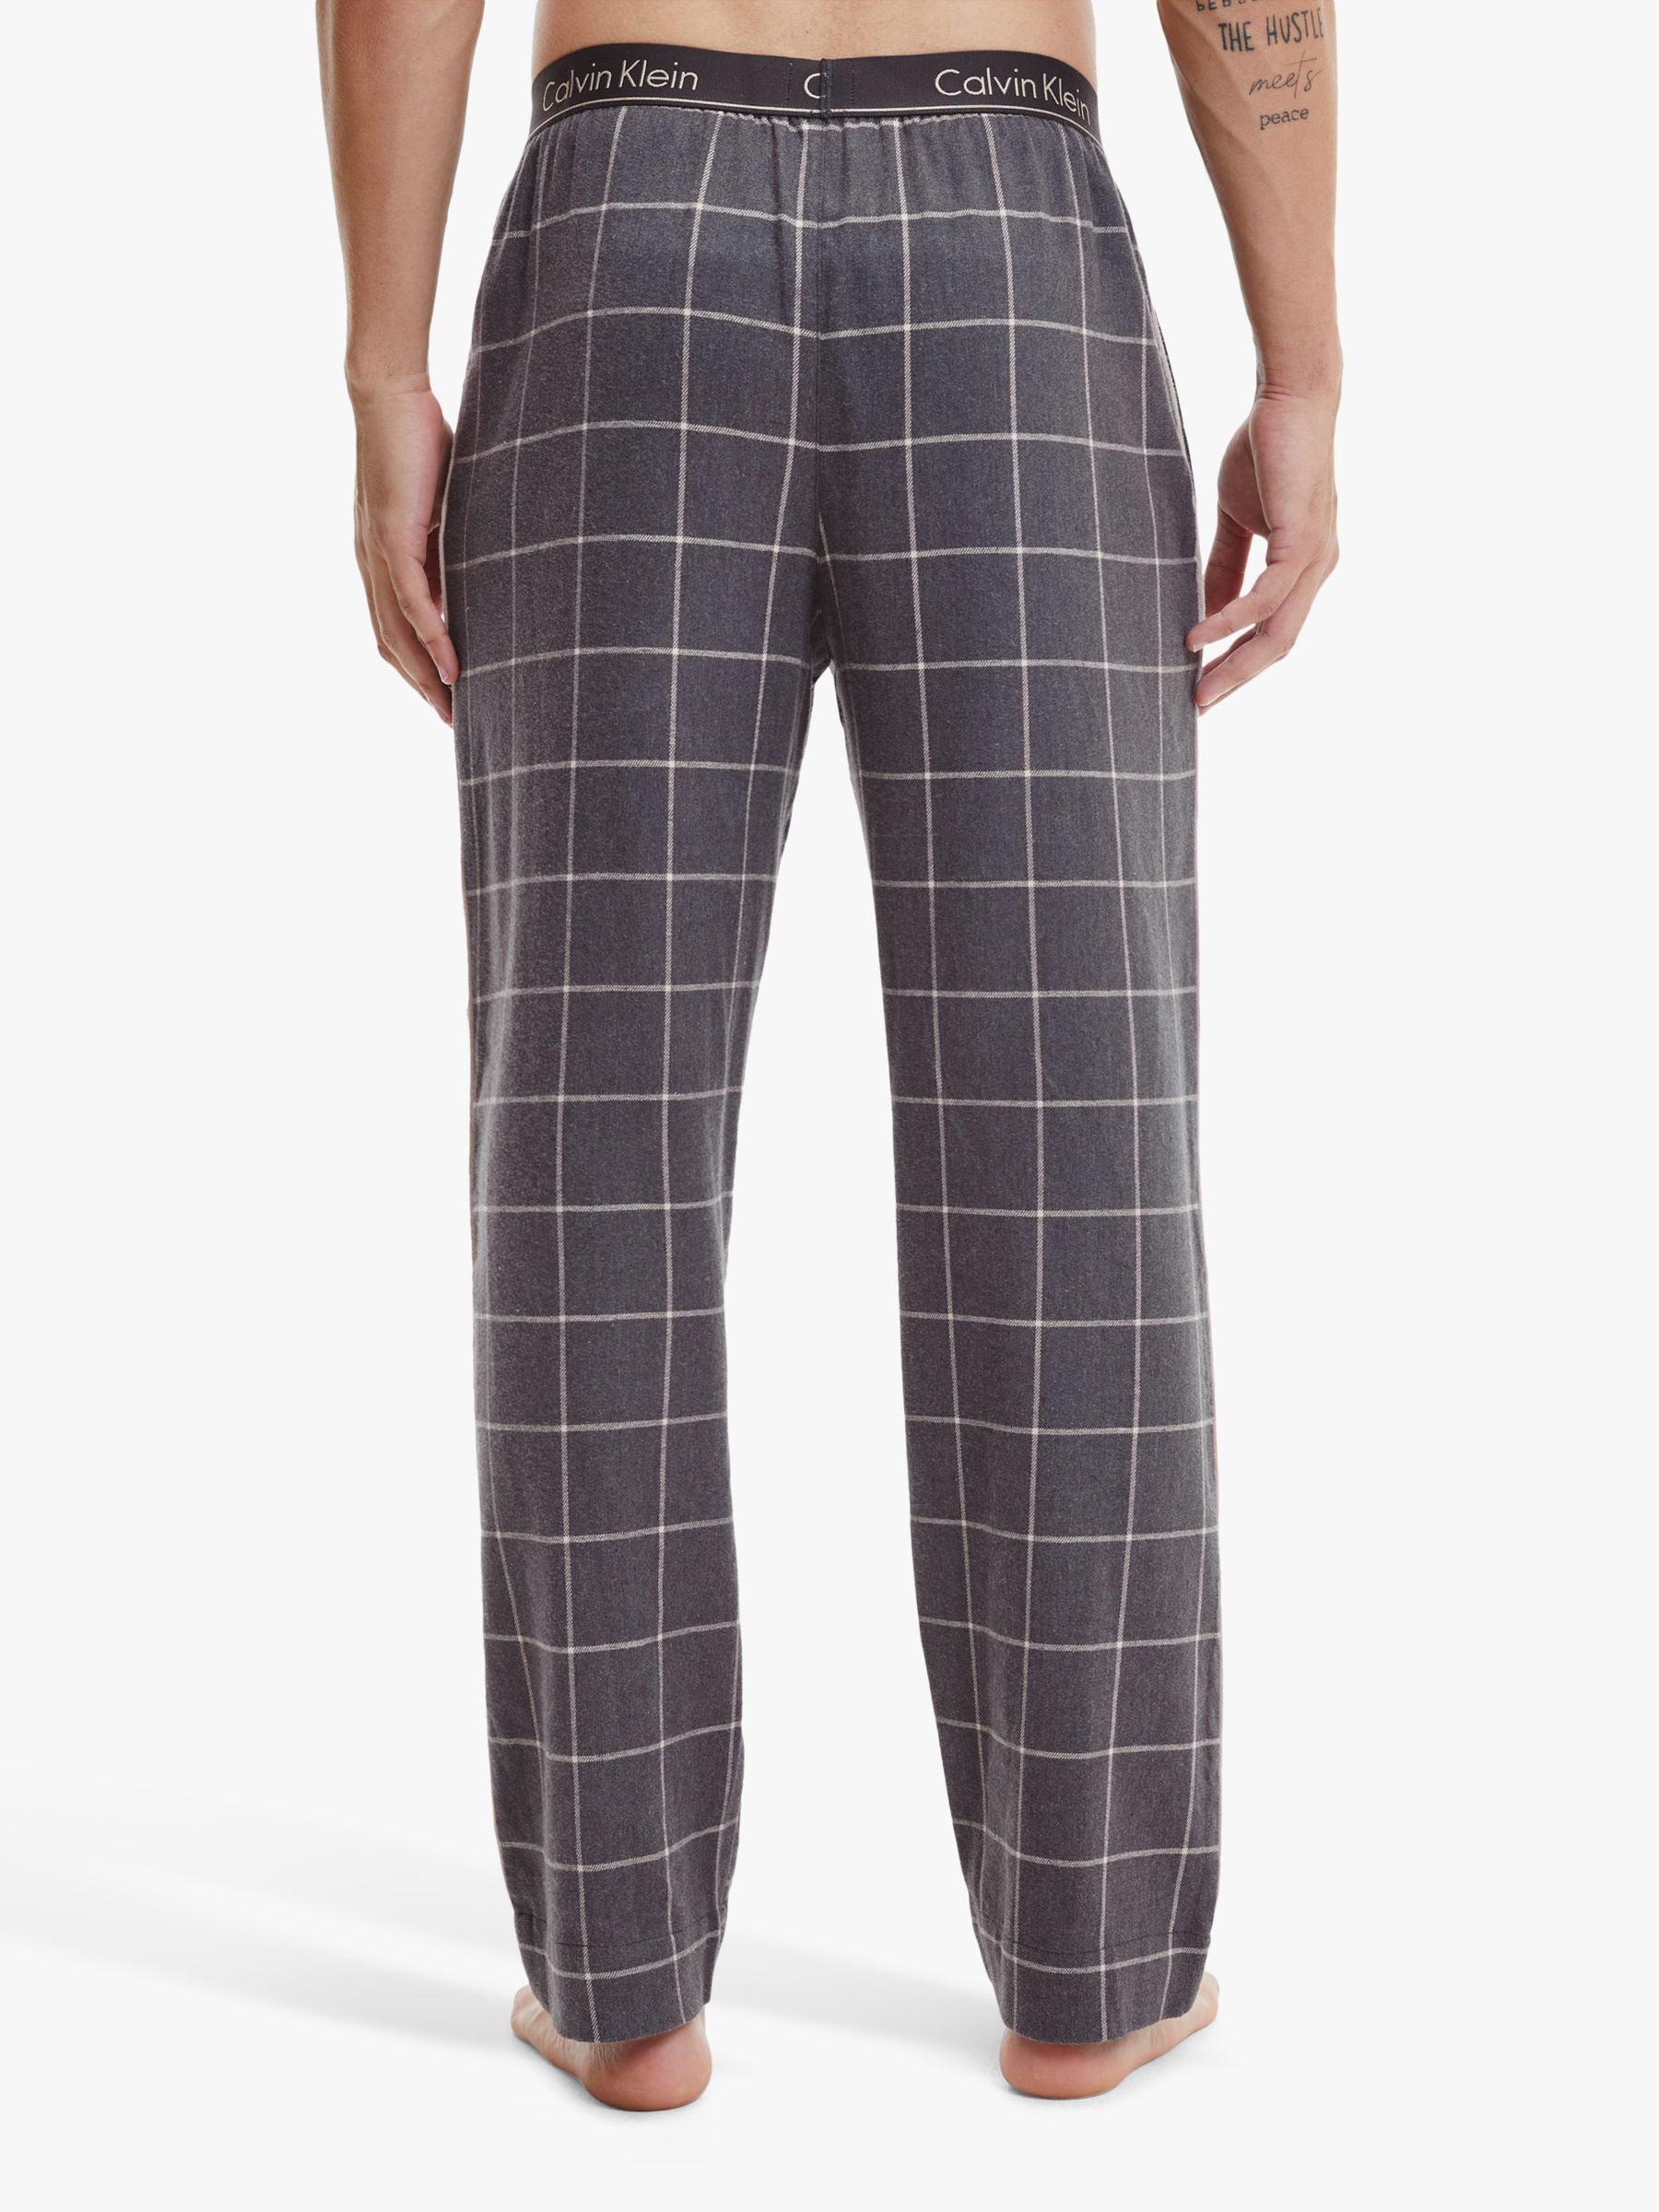 Calvin Klein Check Flannel Lounge Trousers, Grey/Blue